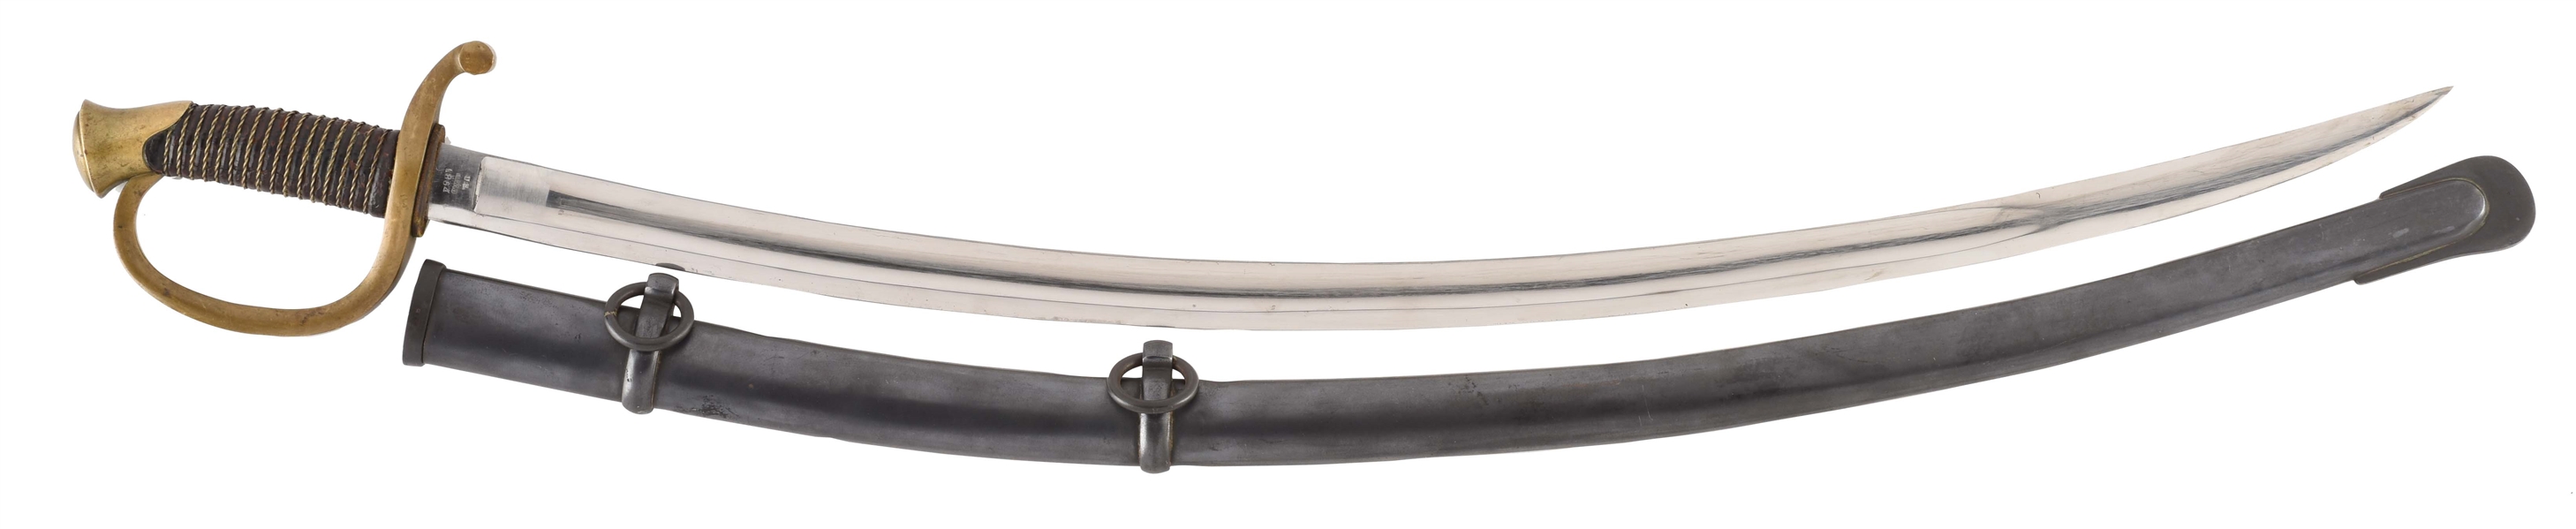 AMES MODEL 1840 ARTILLERY SABER WITH SCABBARD.